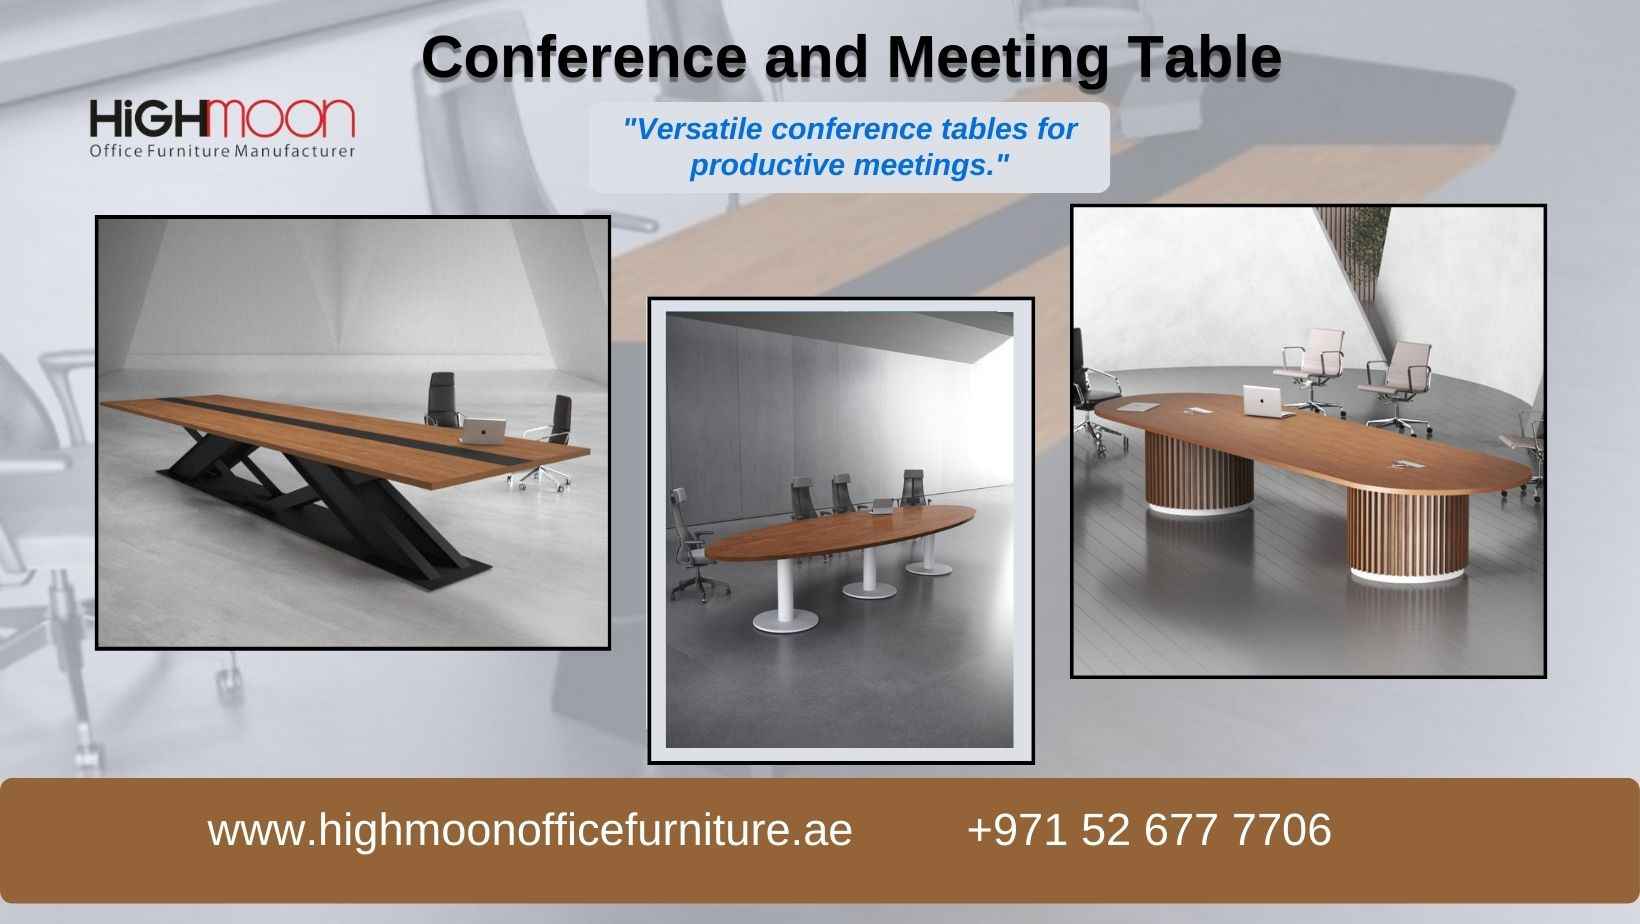 Conference and Meeting Table